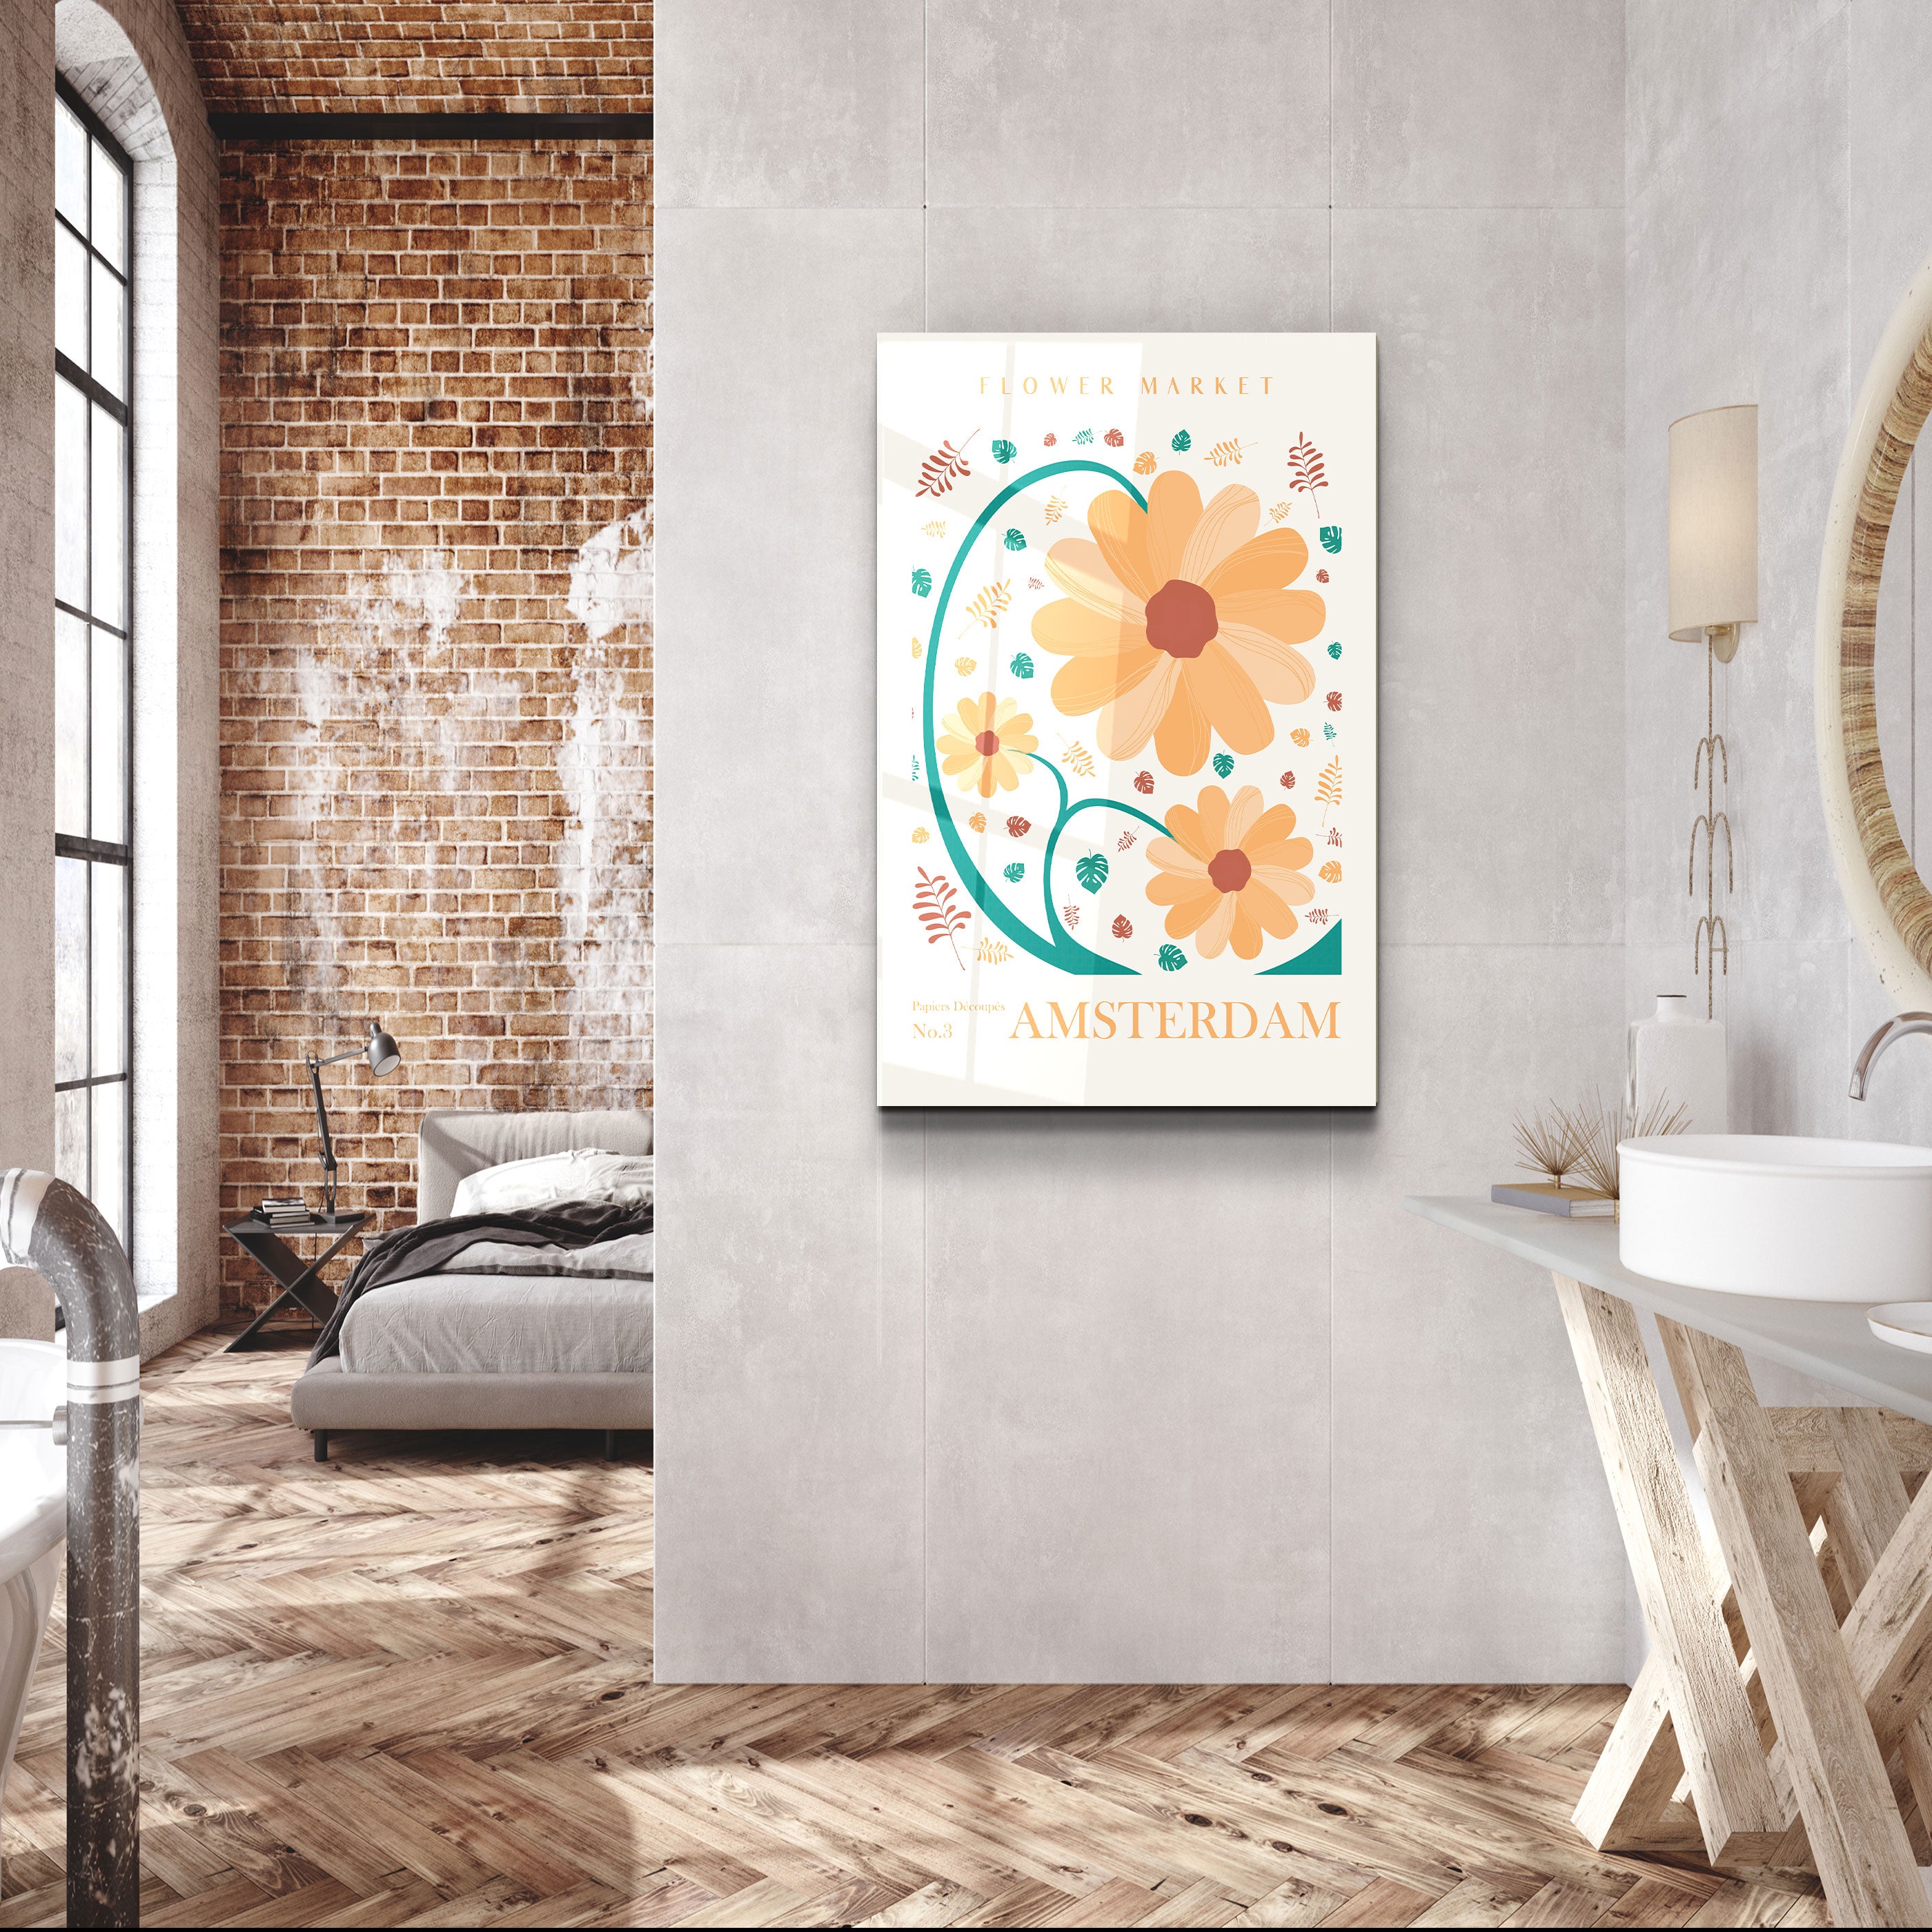 ・"Flower Market No:3 Amsterdam"・Gallery Print Collection Glass Wall Art